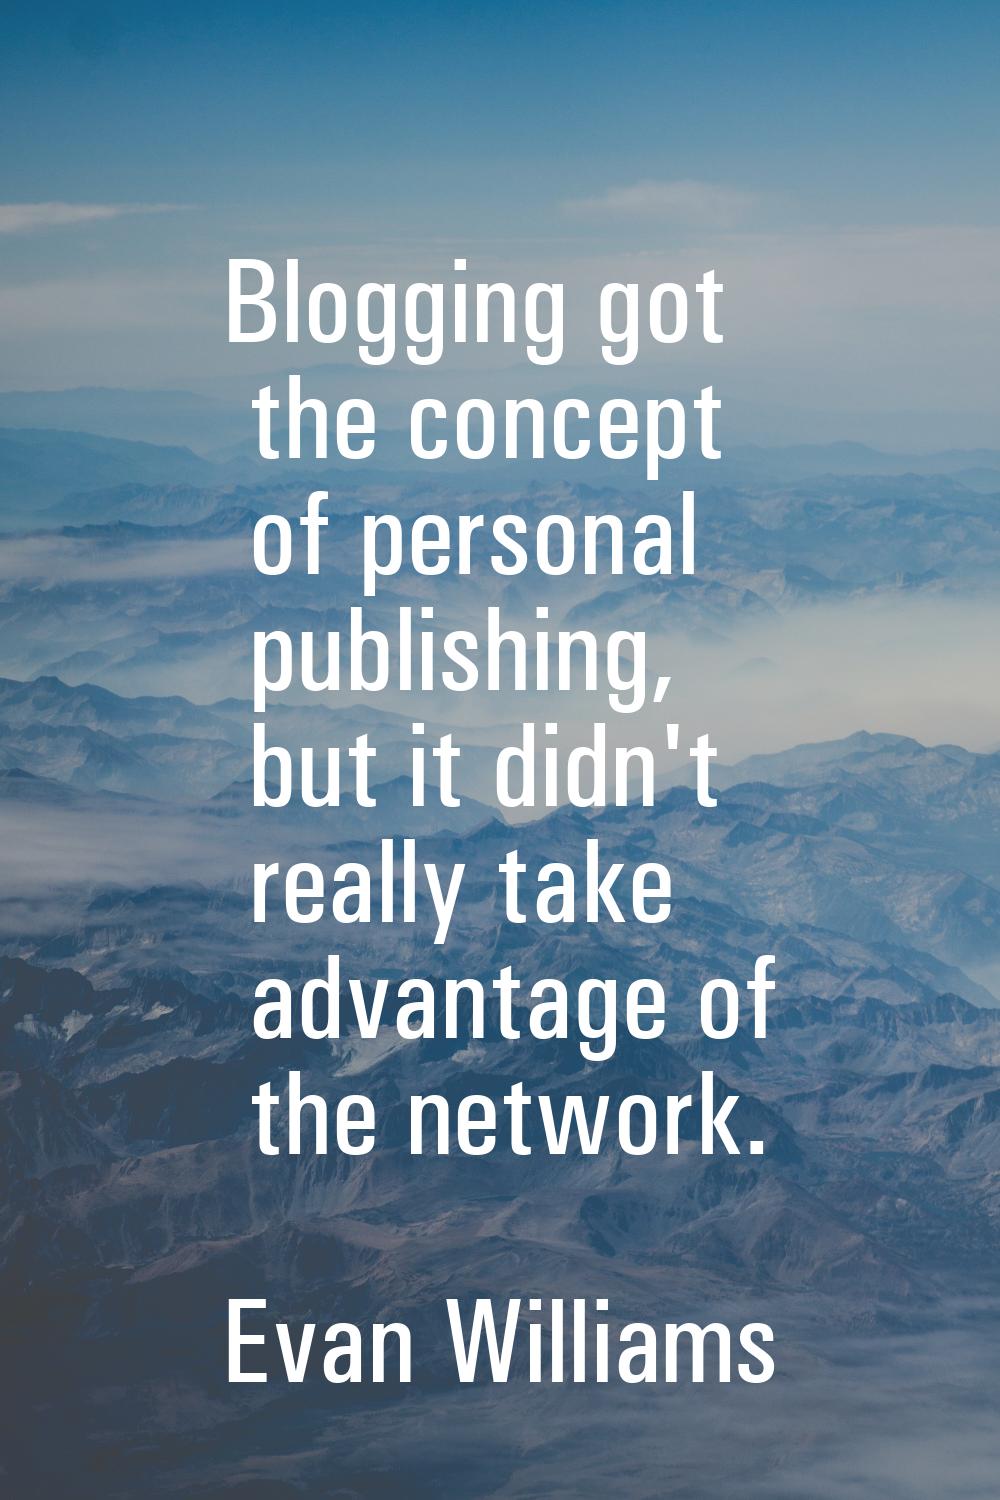 Blogging got the concept of personal publishing, but it didn't really take advantage of the network